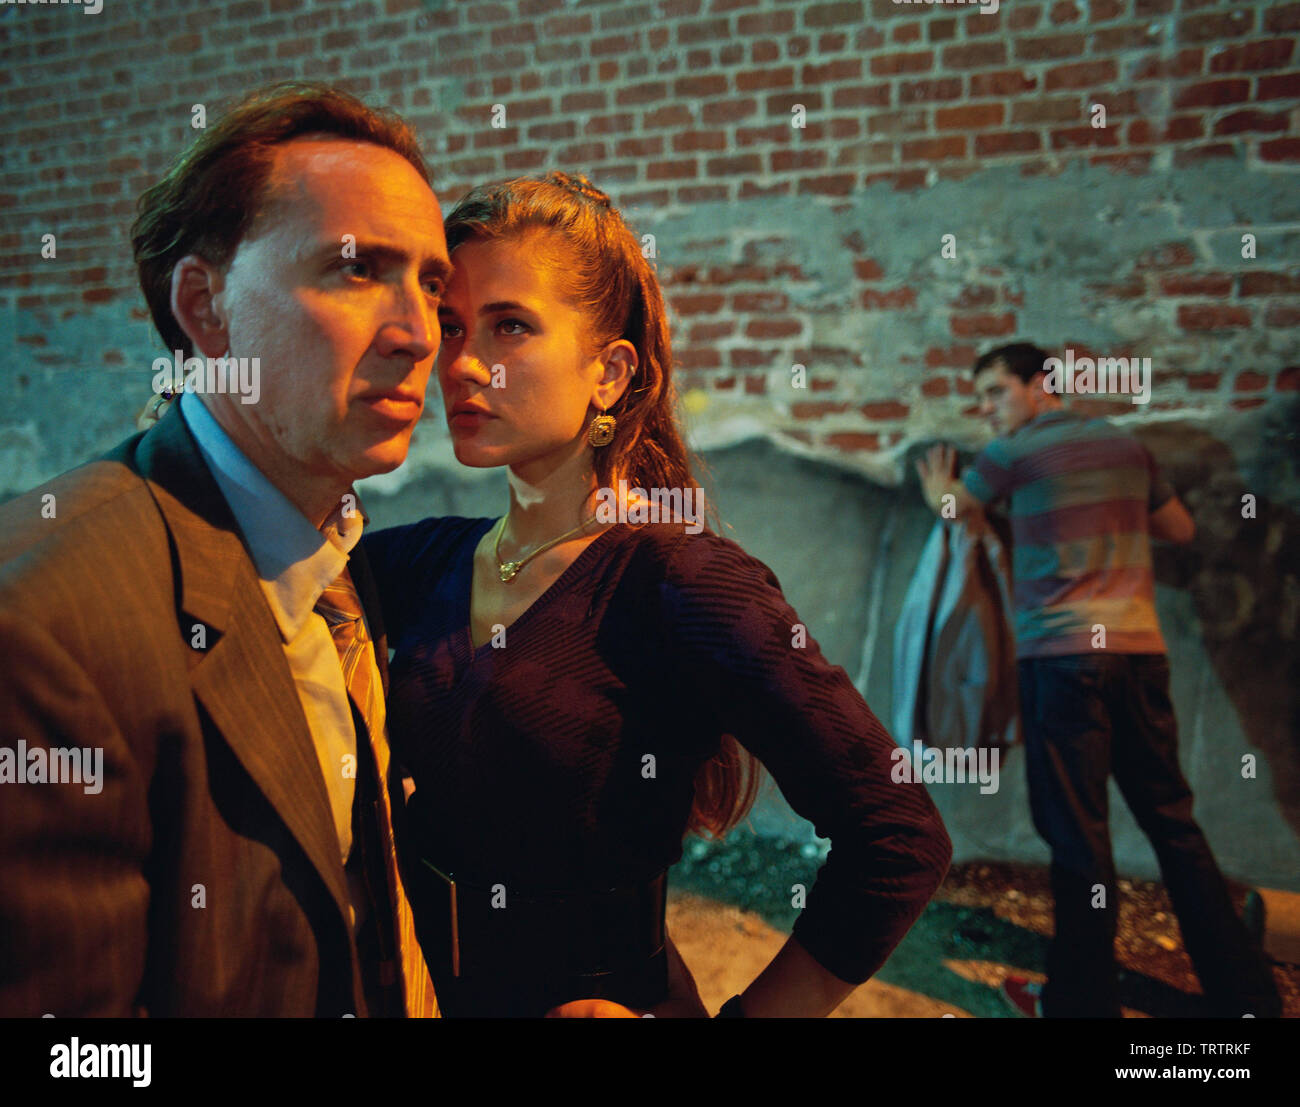 NICOLAS CAGE in THE BAD LIEUTENANT: PORT OF CALL-NEW ORLEANS (2009).  Copyright: Editorial use only. No merchandising or book covers. This is a  publicly distributed handout. Access rights only, no license of